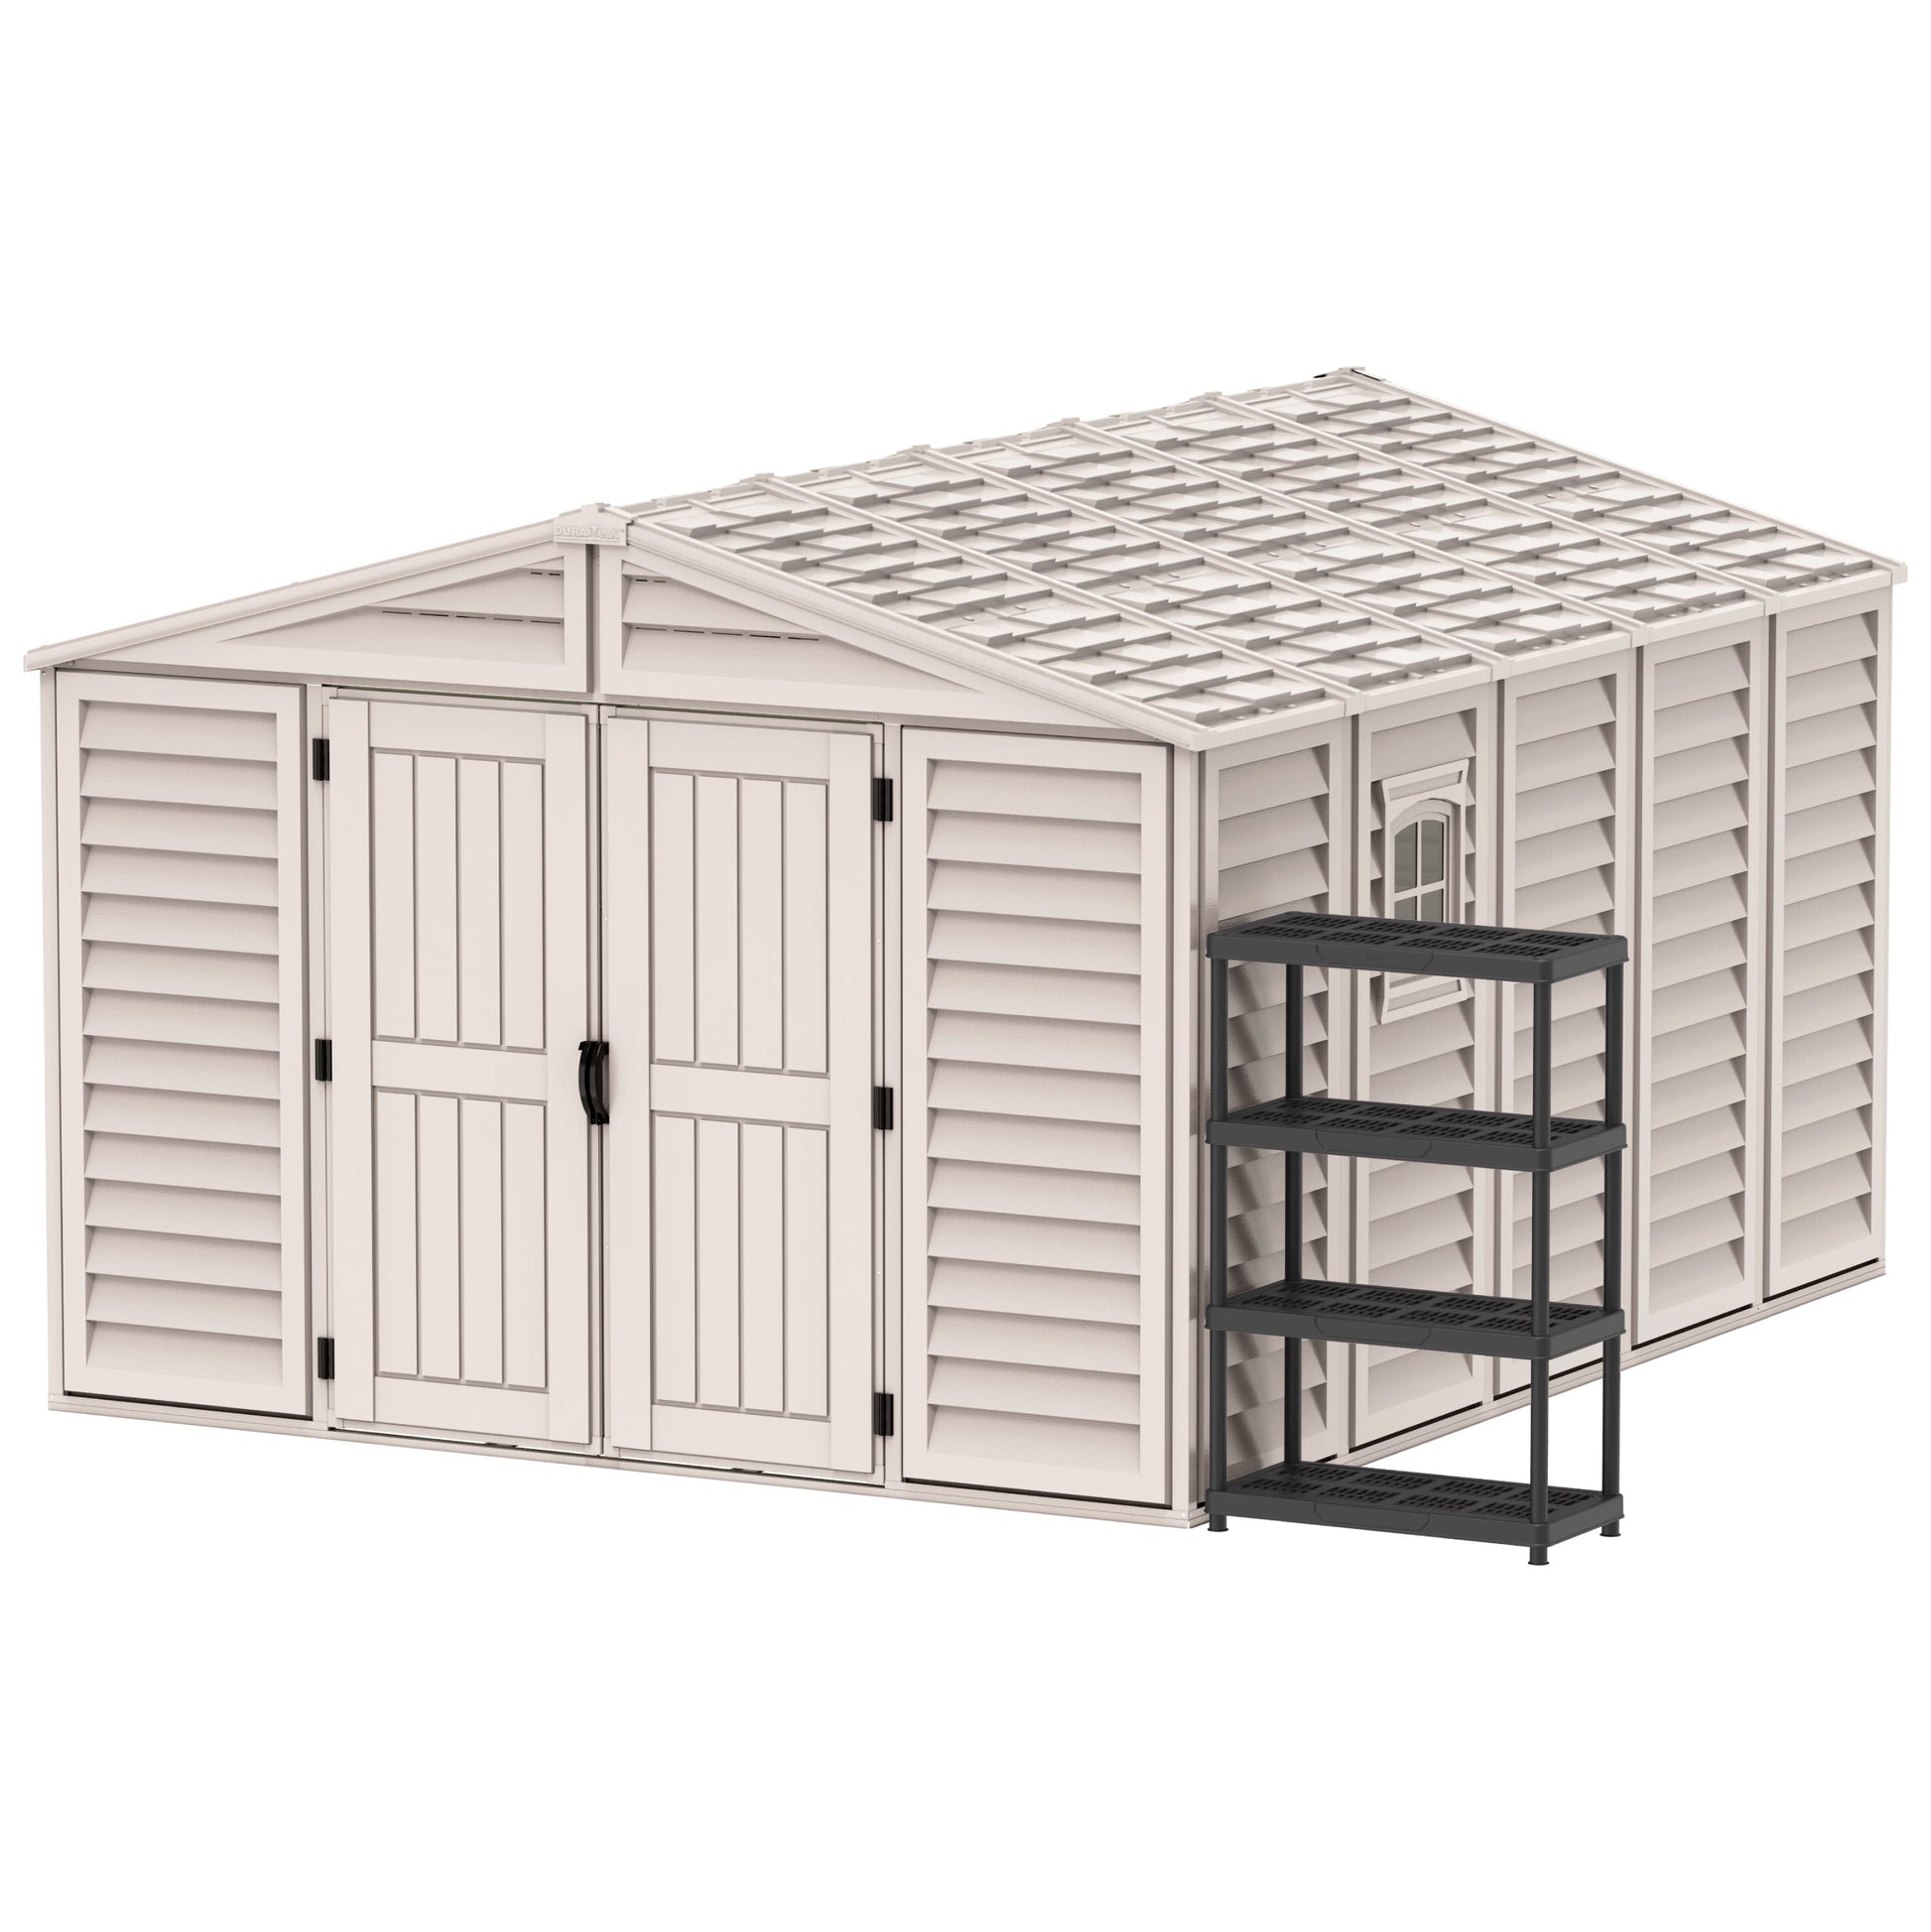 Walk-in Shed 10.5x13ft with FREE Rack- Cosmoplast KSA